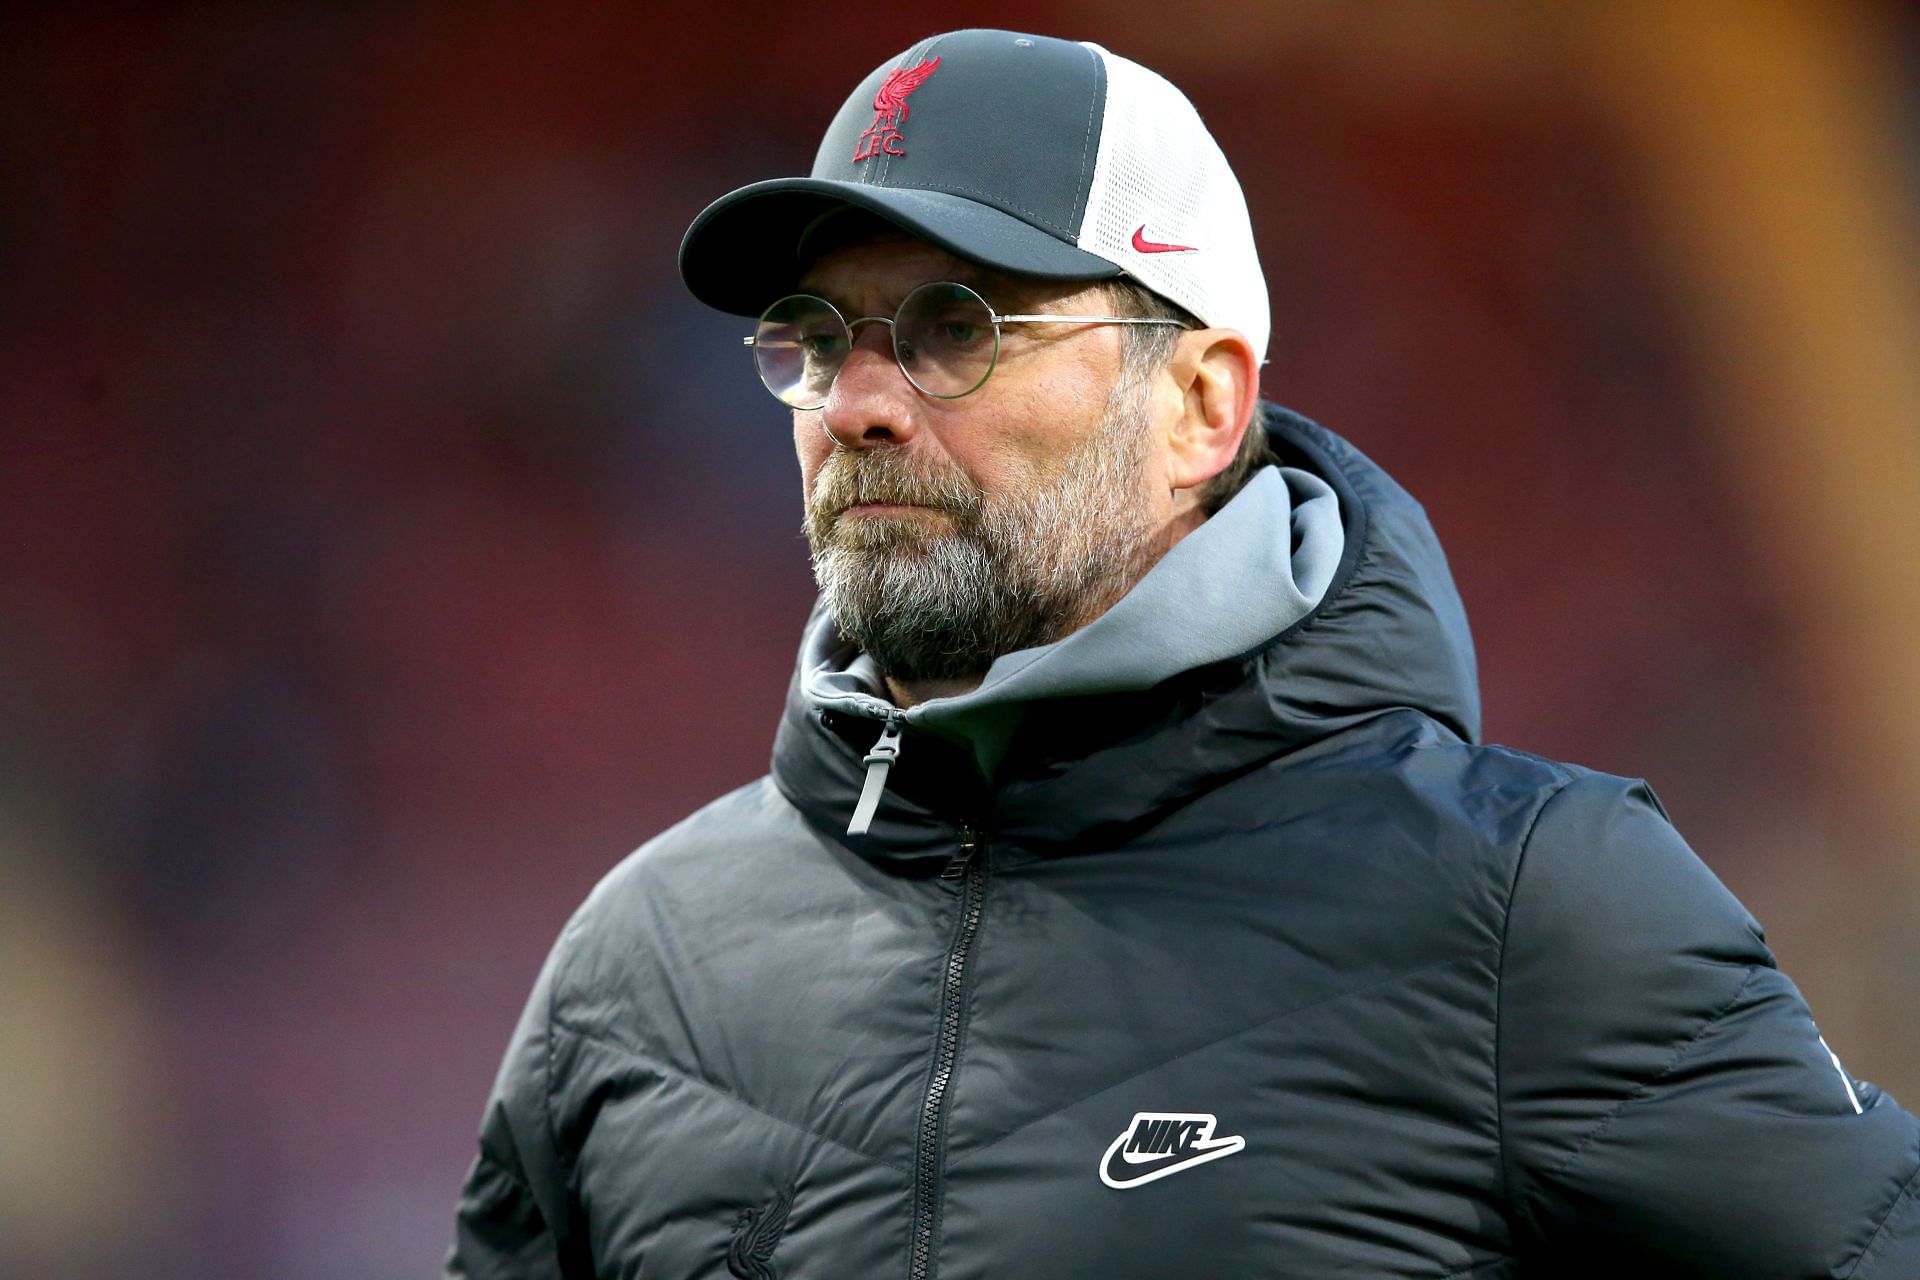 Liverpool manager Jurgen Klopp. (Photo by Alex Livesey/Getty Images)